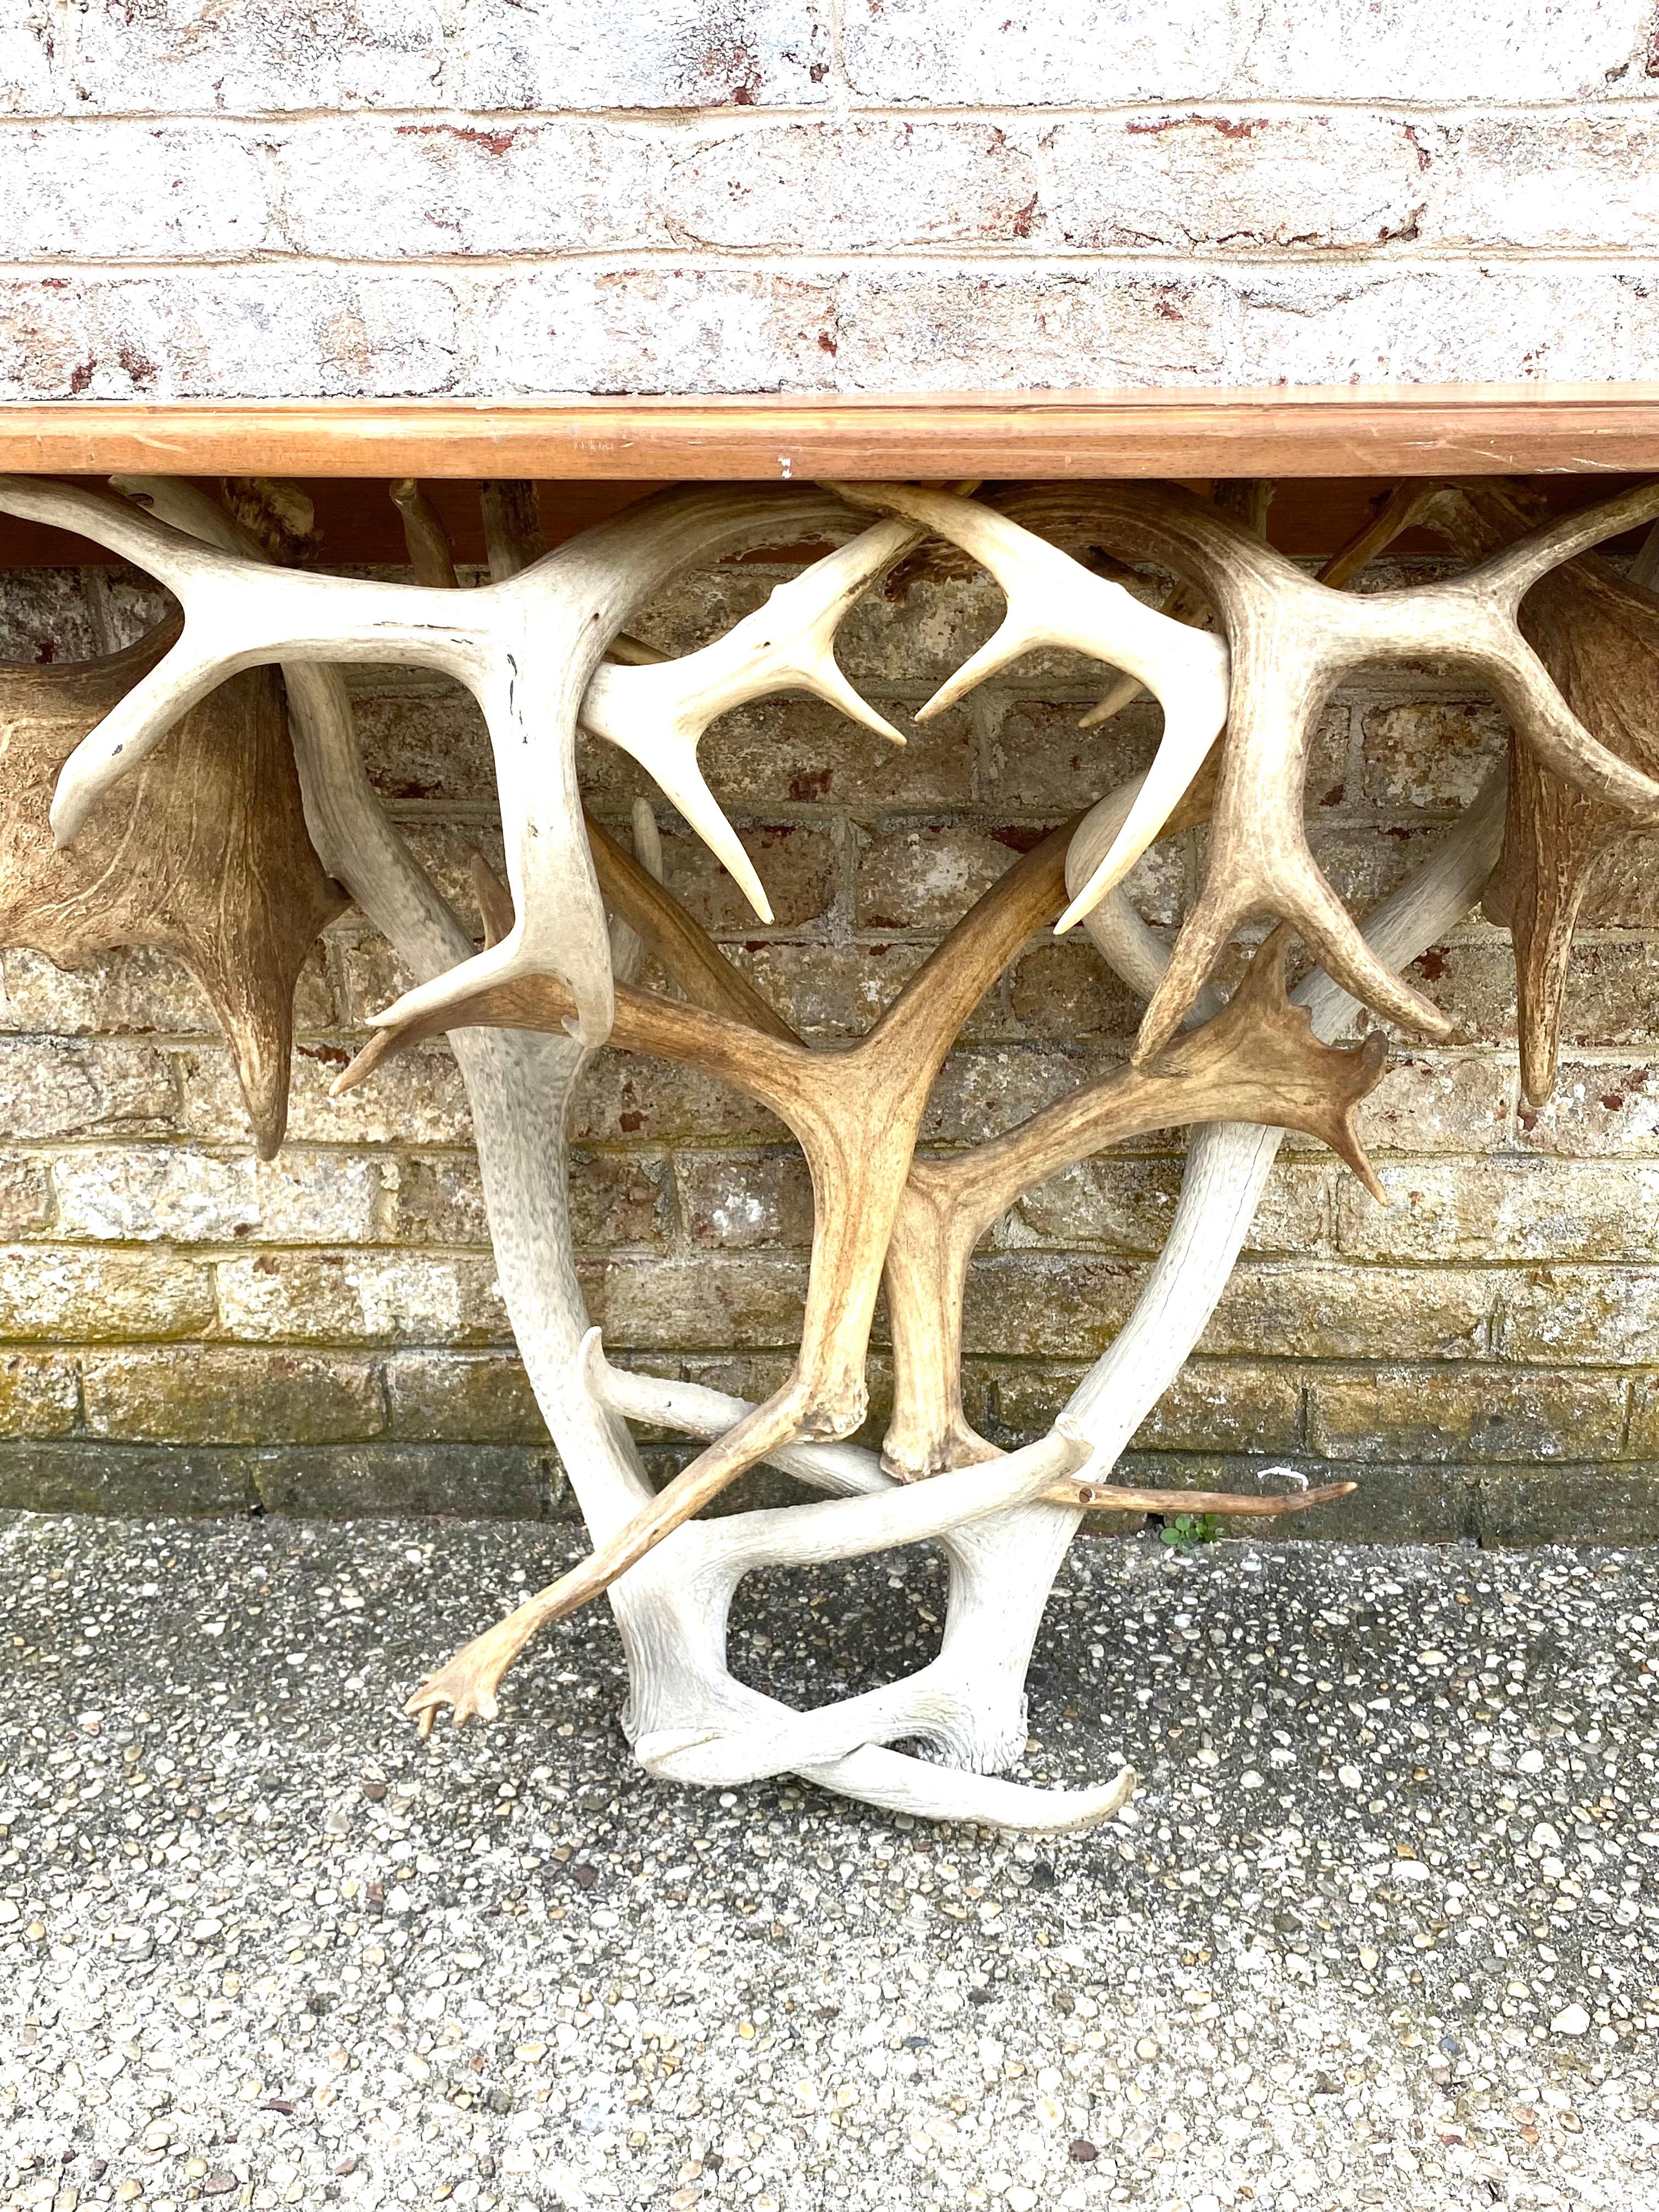 Demi-lune wood top console with base made up of deer and moose antlers....